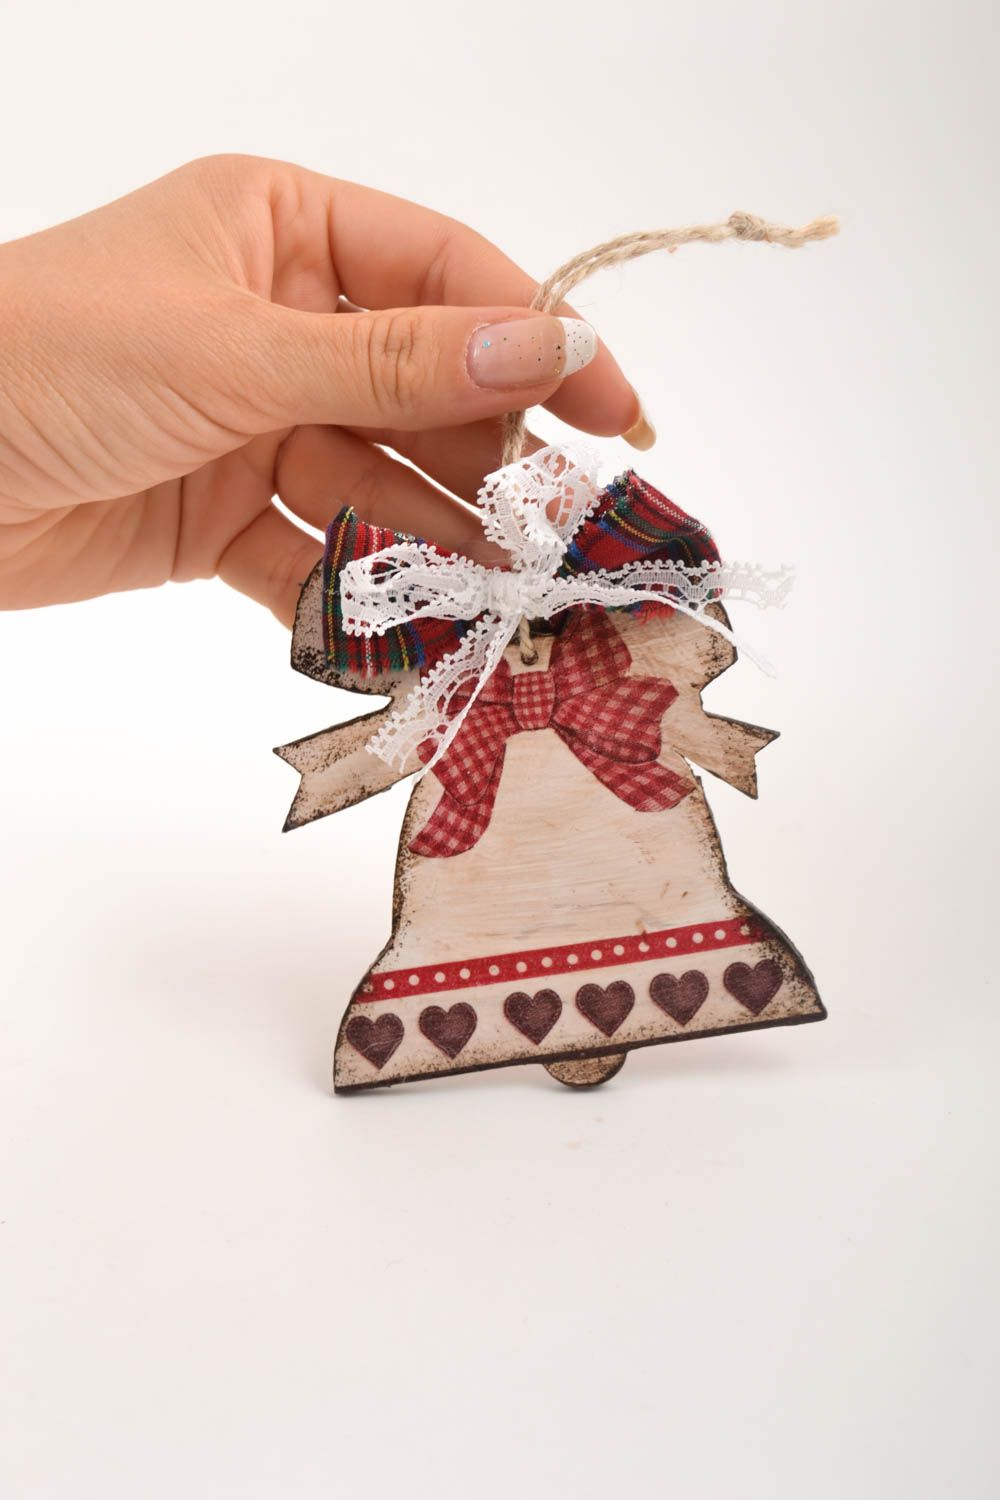 Handmade Christmas ornament decoupage ideas wall hanging decorative use only photo 5